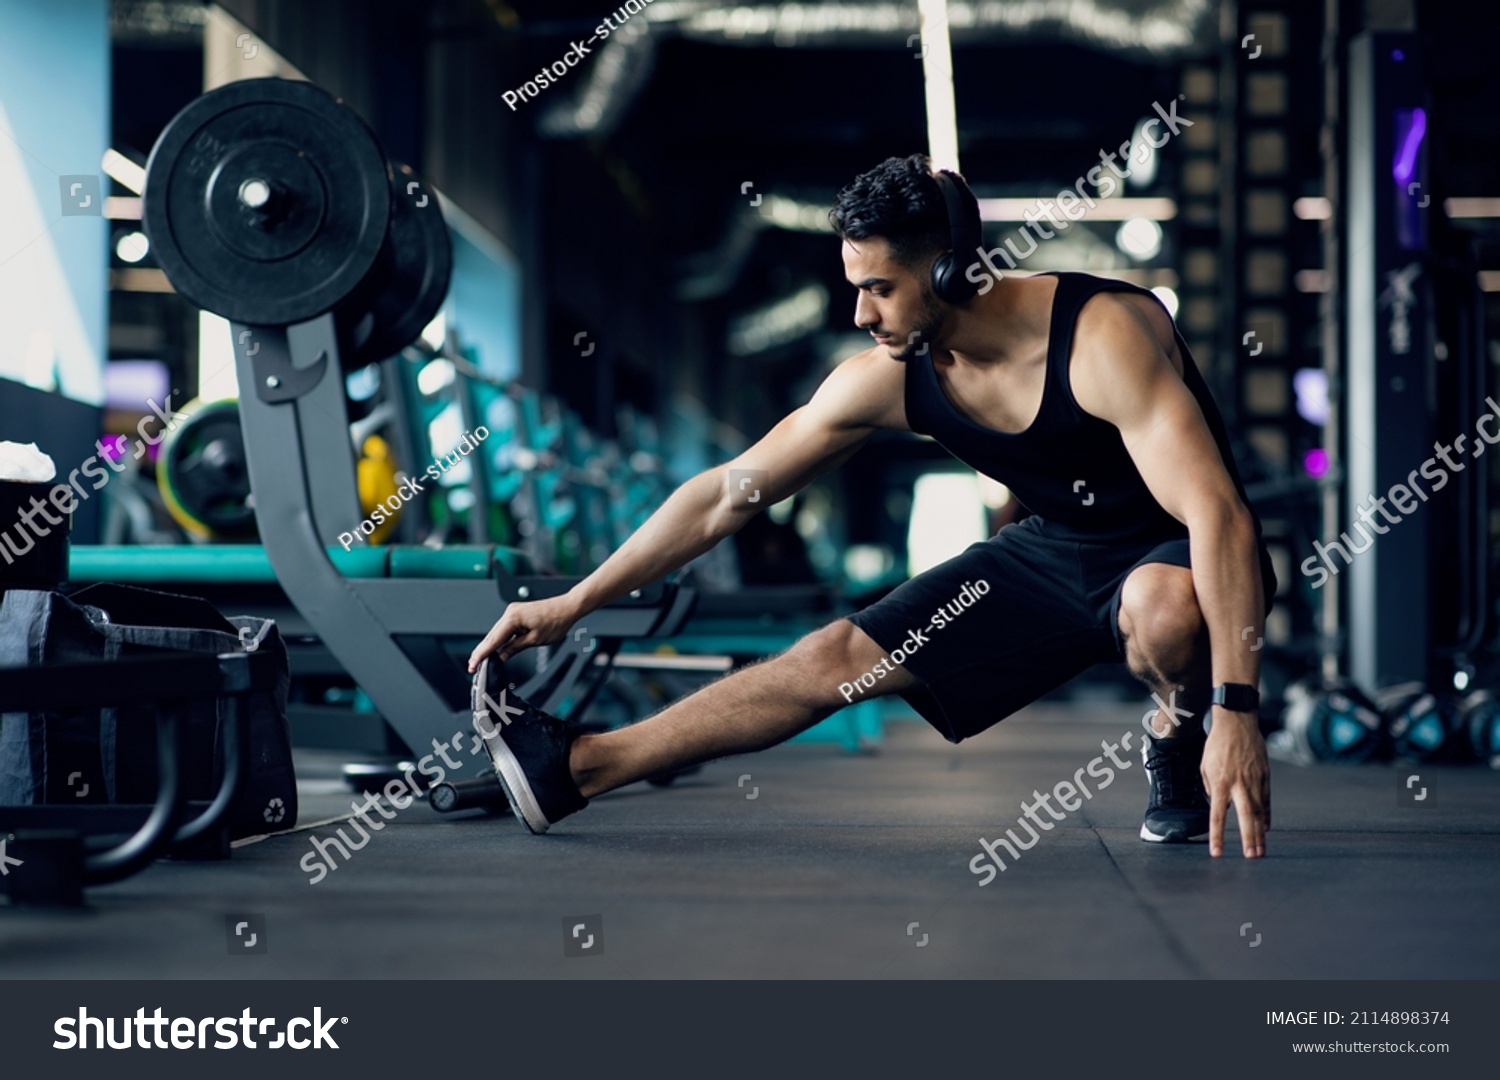 Handsome Young Middle Eastern Male Athlete Warming Up Before Training At Gym, Motivated Millennial Arab Man Stretching Leg Muscles, Preparing For Fitness Workout In modern Sport Club, Copy Space #2114898374